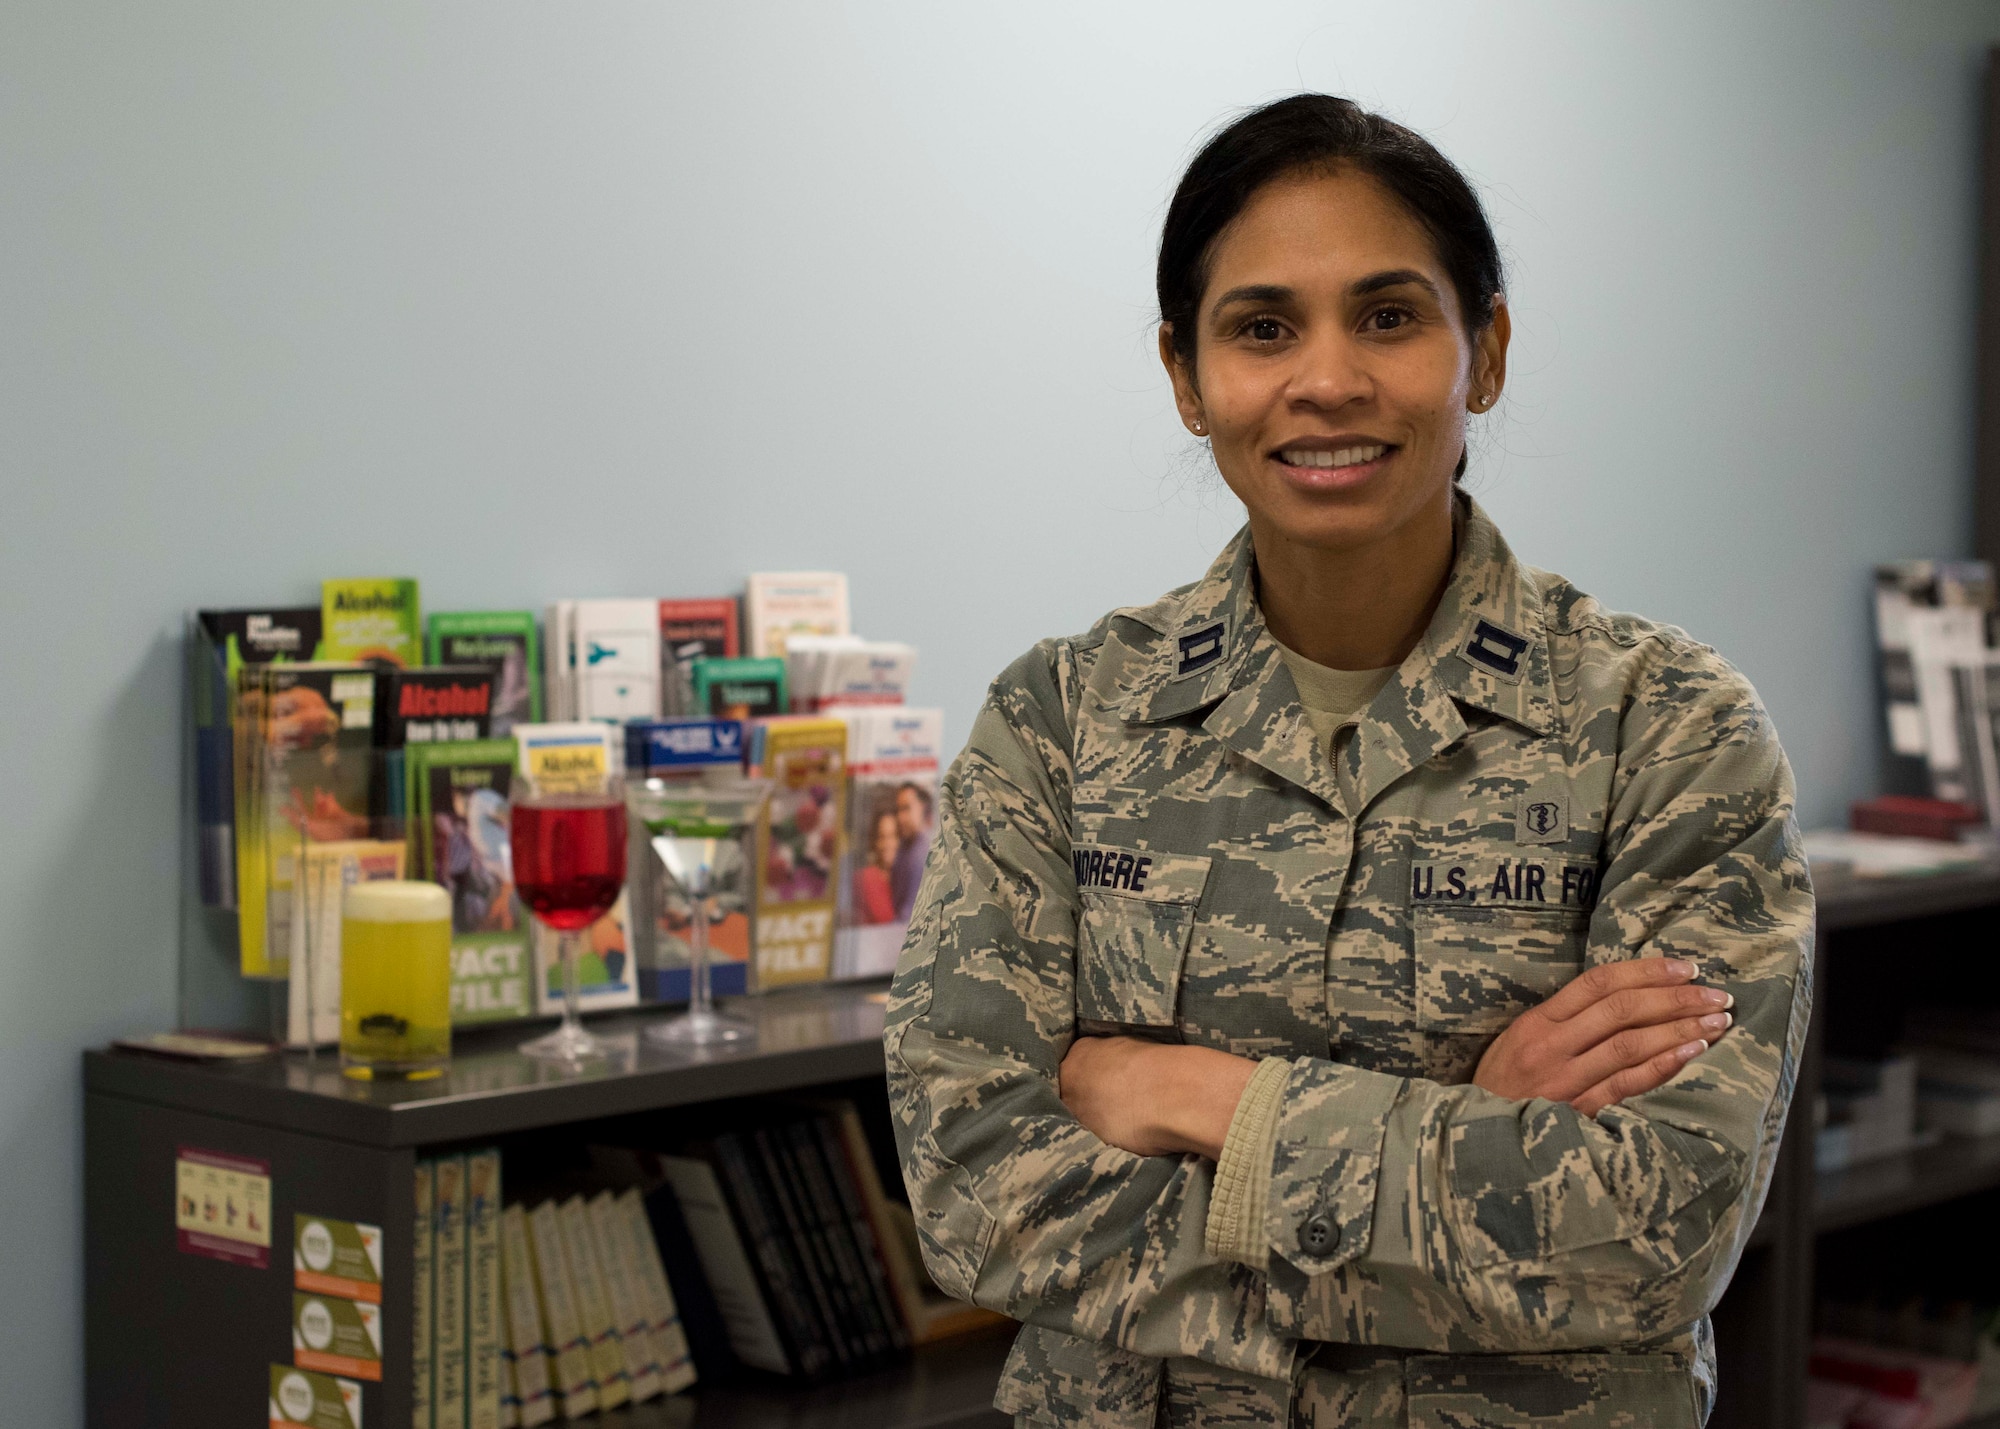 Capt. Sybella Morere, 49th Medical Group clinical social worker, poses for a photo, Jan. 24, 2019, on Holloman Air Force Base, N.M. The 49th MDG’s mental health team is comprised of clinical psychologists, clinical social workers and nurse practitioners. (U.S. Air Force photo by Staff Sgt. BreeAnn Sachs)